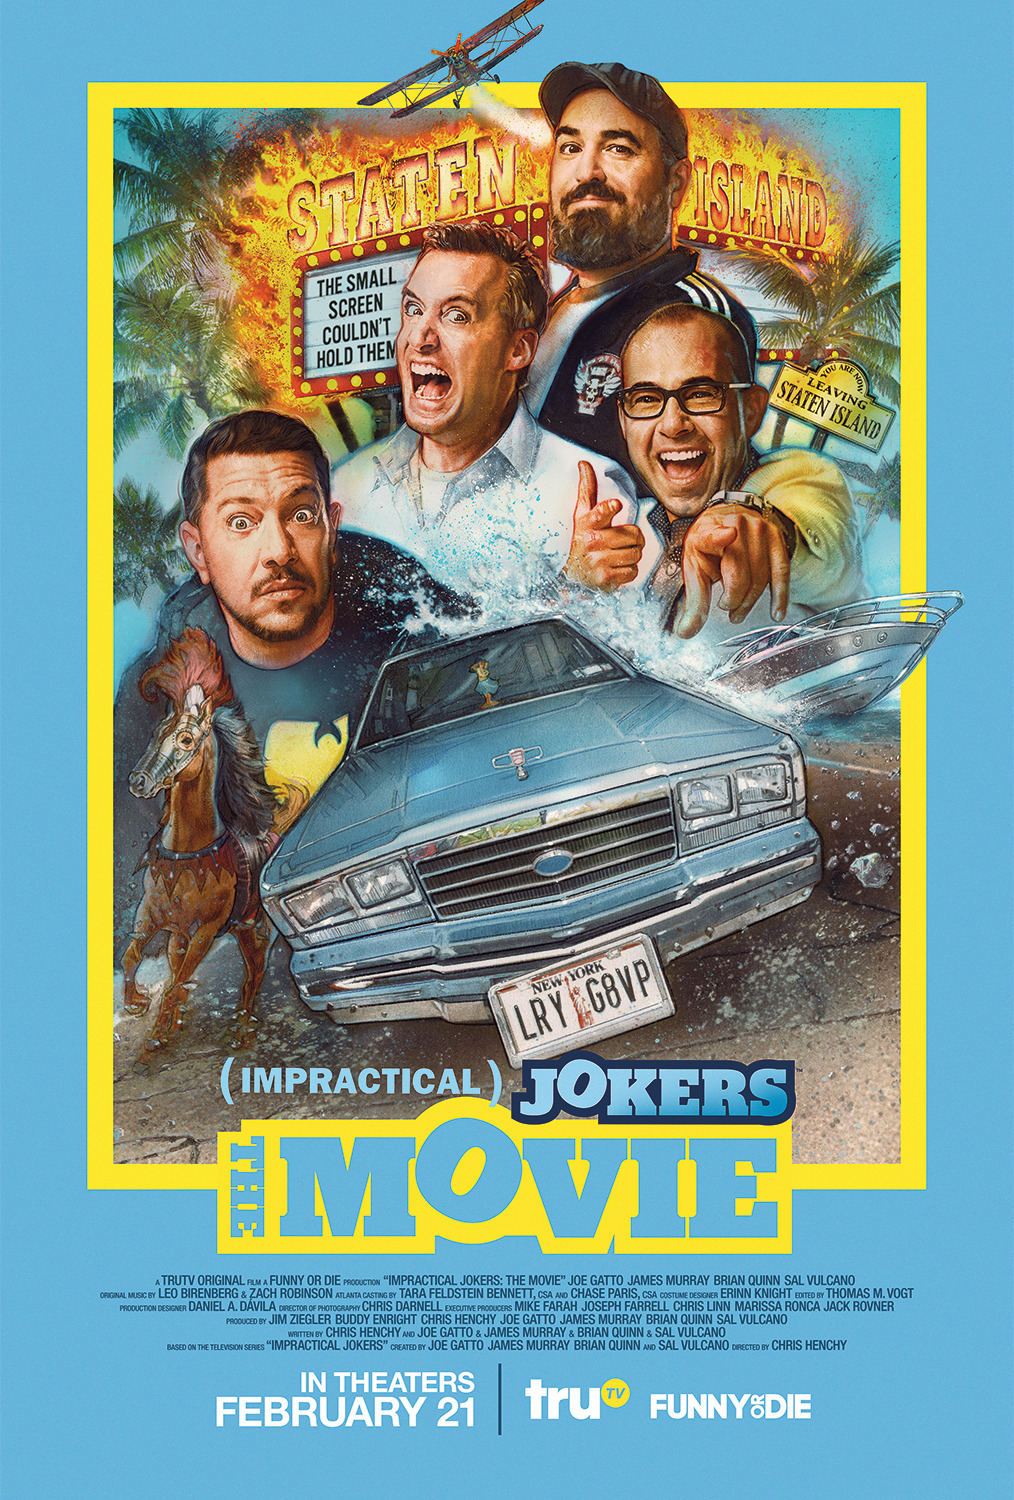 A humiliating high school mishap in 1992 sends the Impractical Jokers on the road, competing in hidden-camera challenges for the chance to turn back the clock and redeem three of the four Jokers.